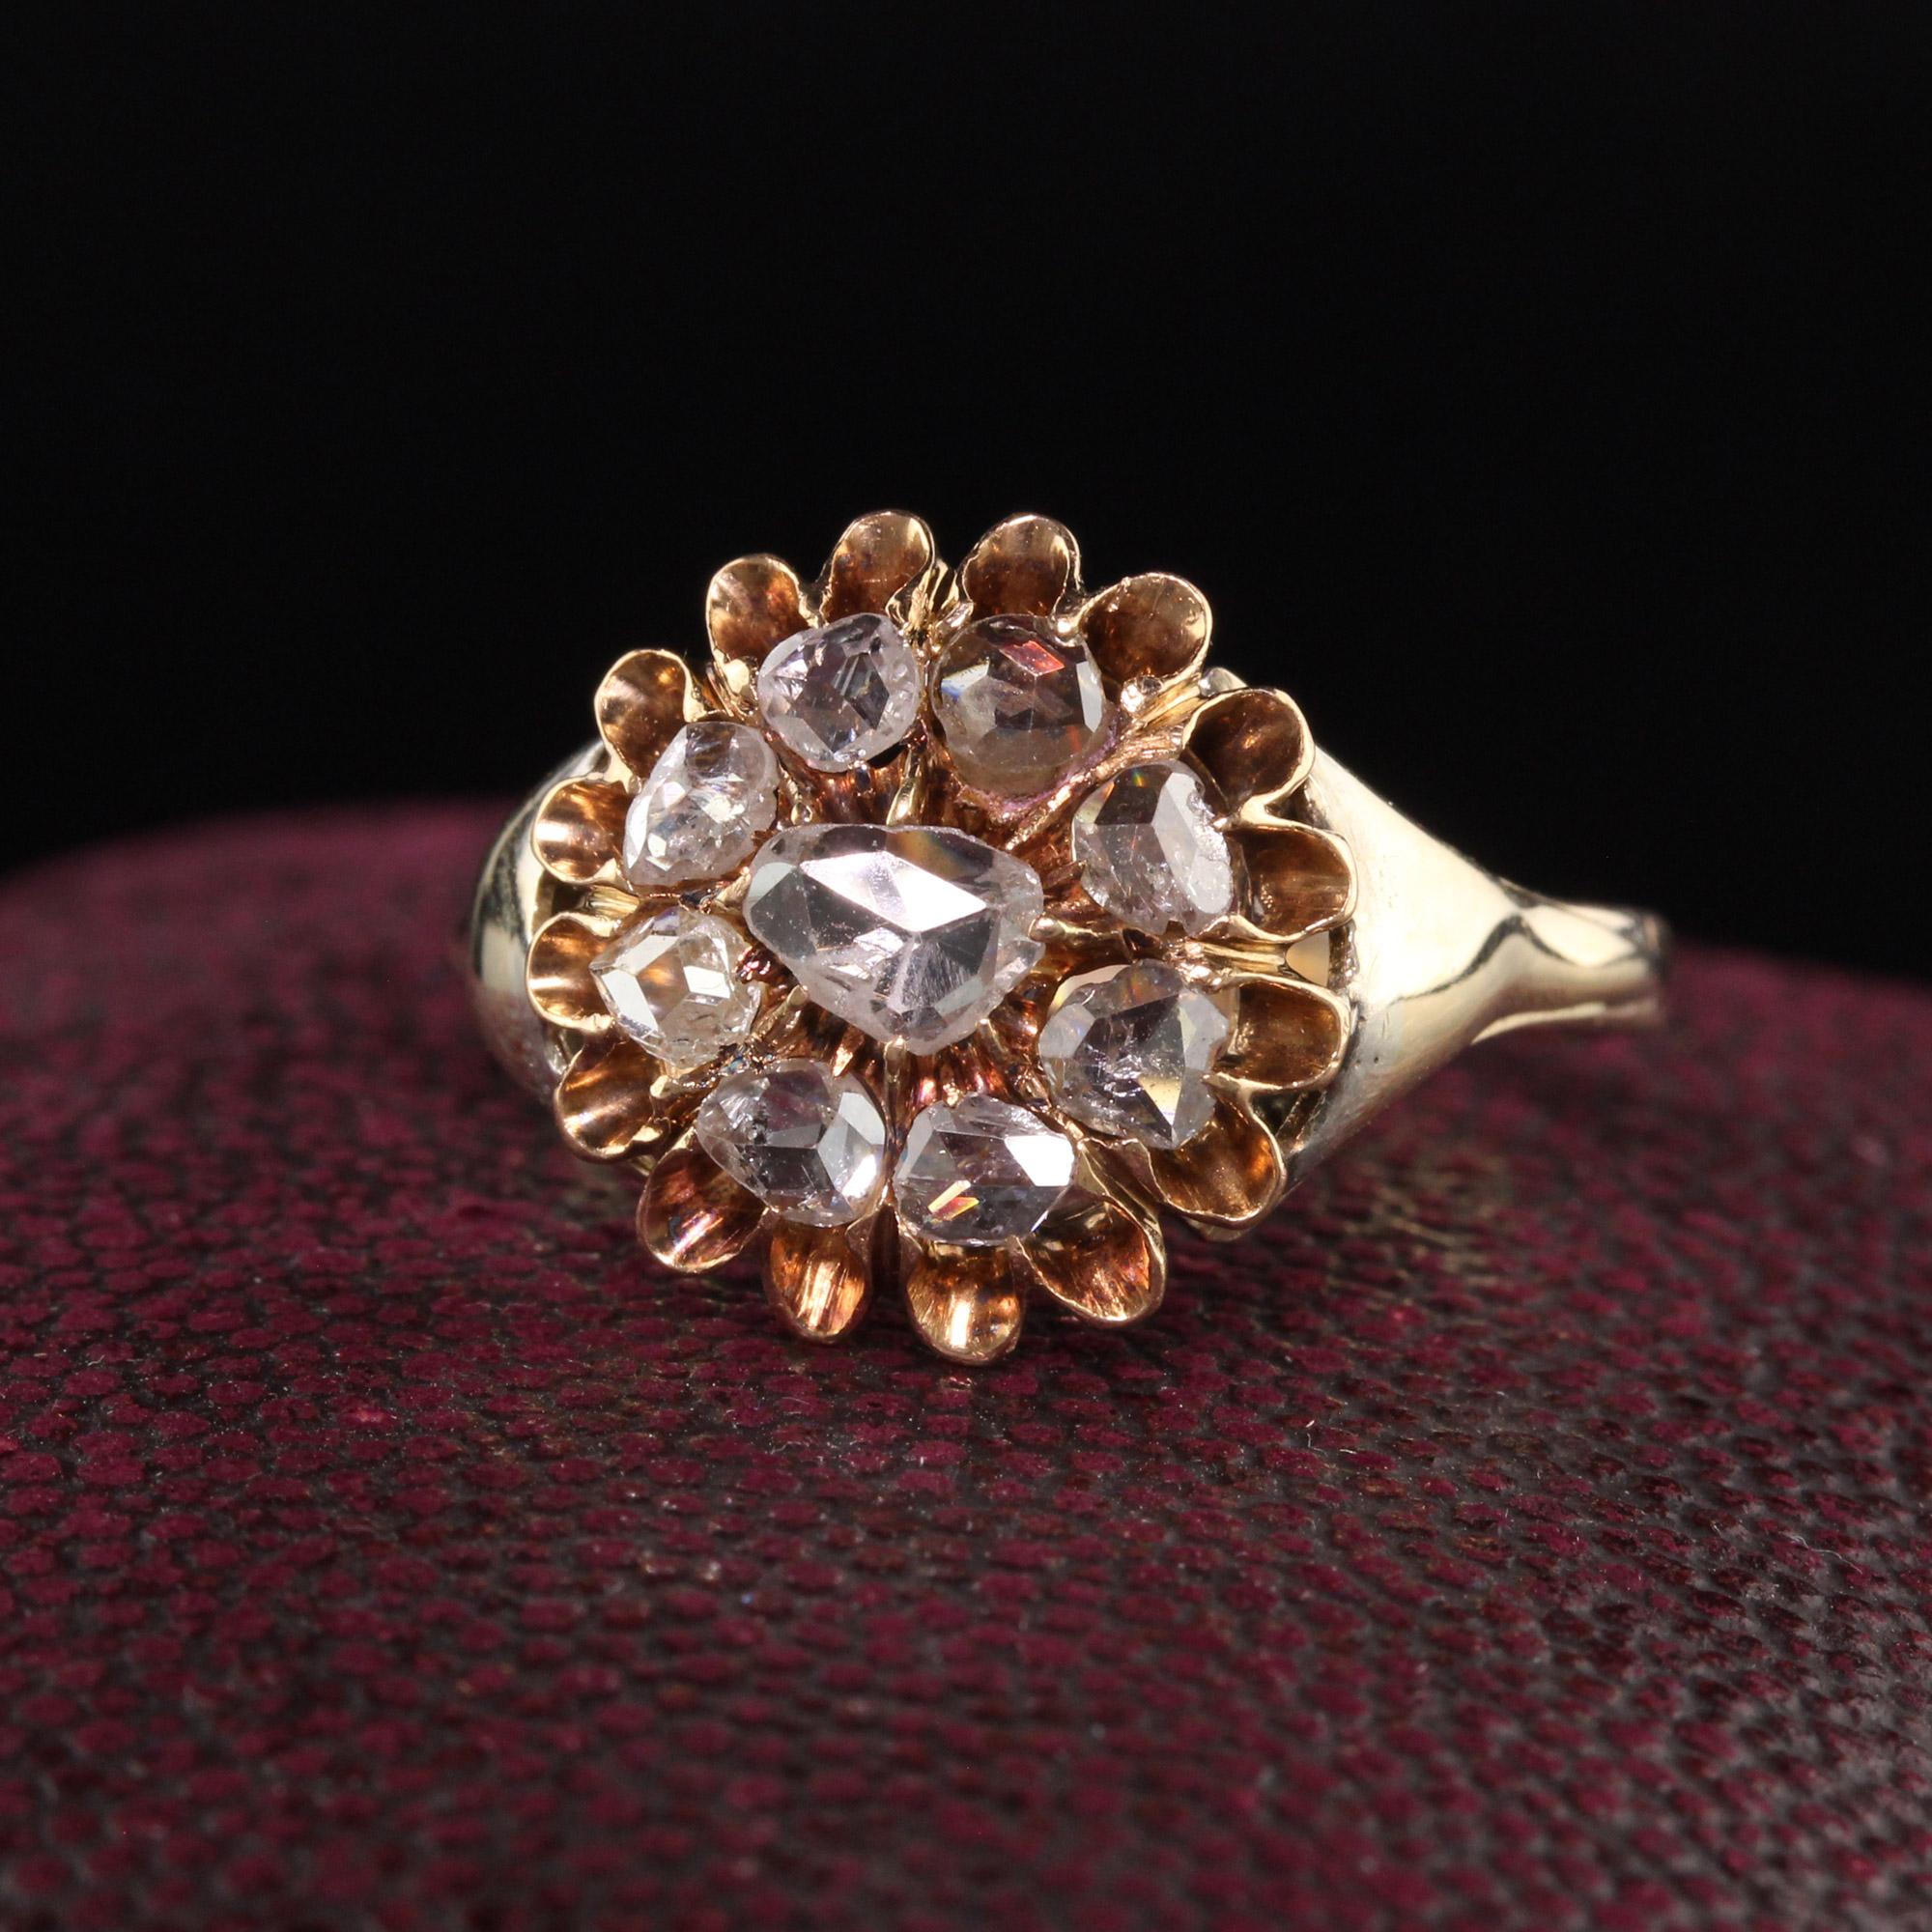 Beautiful Antique Victorian 14K Yellow Gold Rose Cut Diamond Cluster Ring. This gorgeous ring has beautifully cut rose cut diamonds in a cluster design and sits low to the finger.

Item #R1063

Metal: 14K Yellow Gold

Weight: 4 Grams

Size: 8